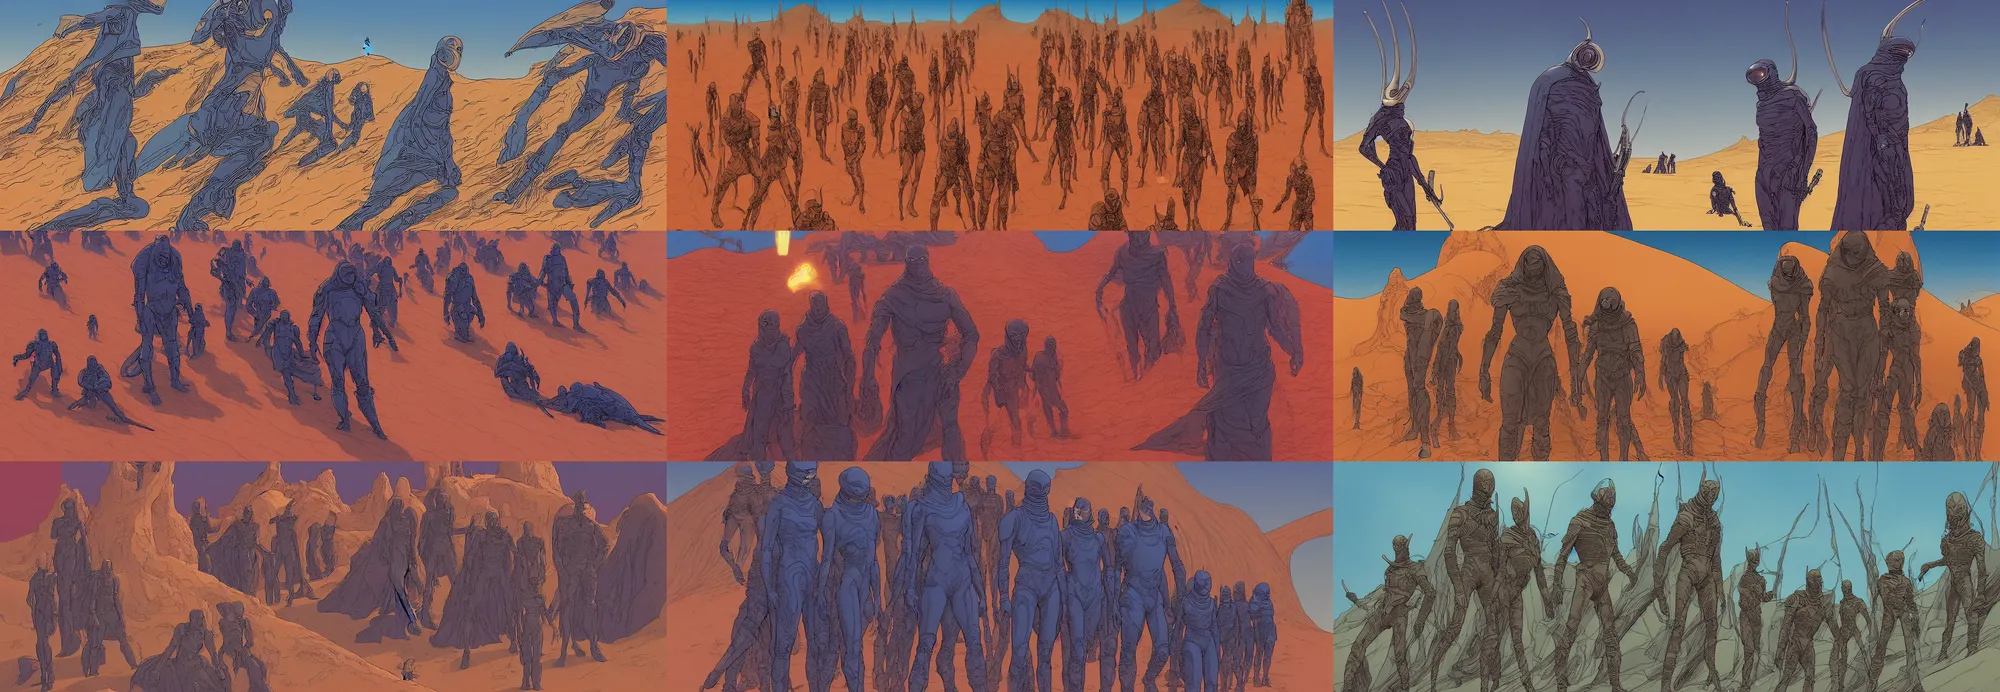 Prompt: dune 2021 by Denis Villeneuve but the Fremen are redesigned to be imaginative creative inhuman aliens on blue desert sand in alien world, art by moebius, Jean Giraud, cinematic, widescreen, 4k